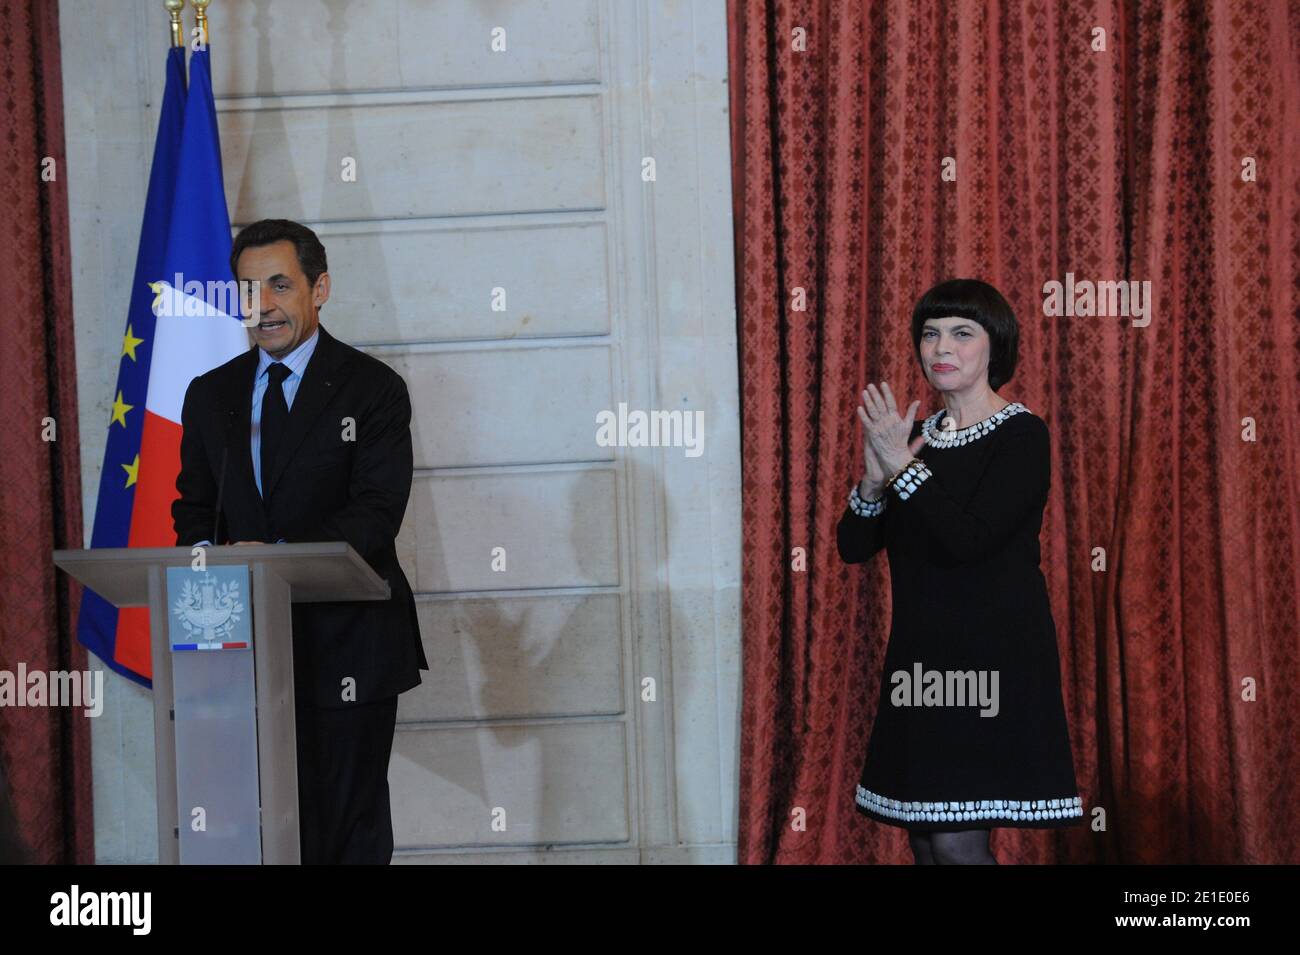 French President Nicolas Sarkozy delivers a speech as he awards of the Legion d'Honneur French singer Mireille Mathieu at Elysee Palace in Paris, France on January 26, 2011. Photo by Mousse/ABACAPRESS.COM Stock Photo